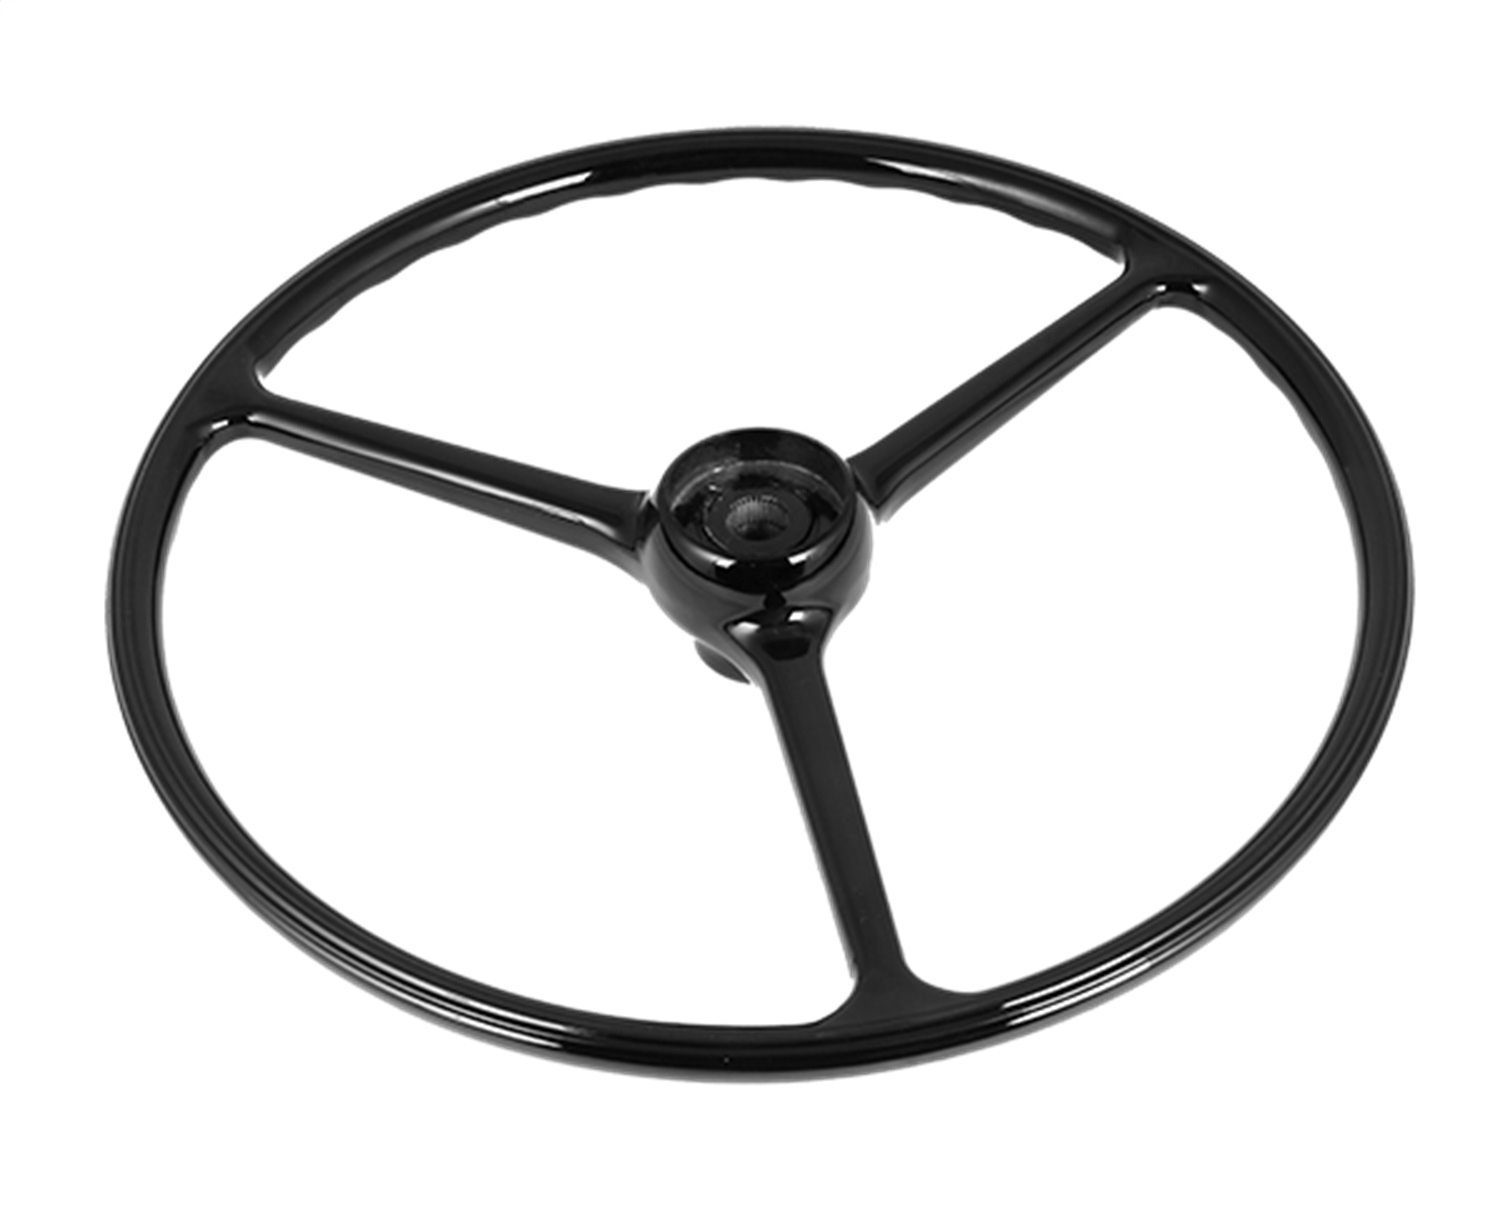 This black steering wheel from Omix-ADA fits 64-75 Jeep CJ models.